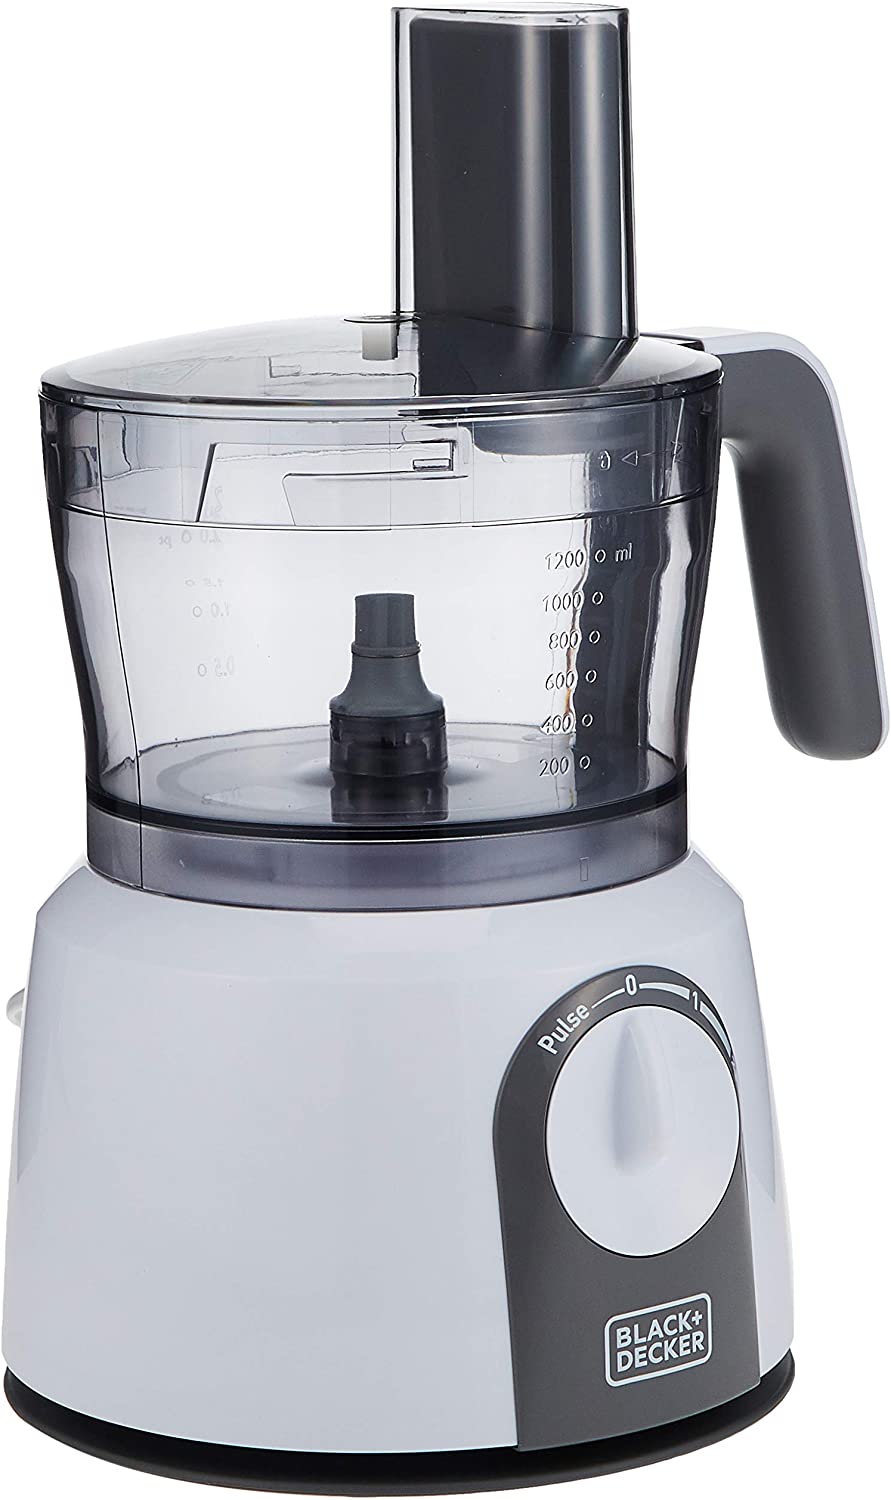 Black and Decker 32 Functions 5 in 1 Food Processor